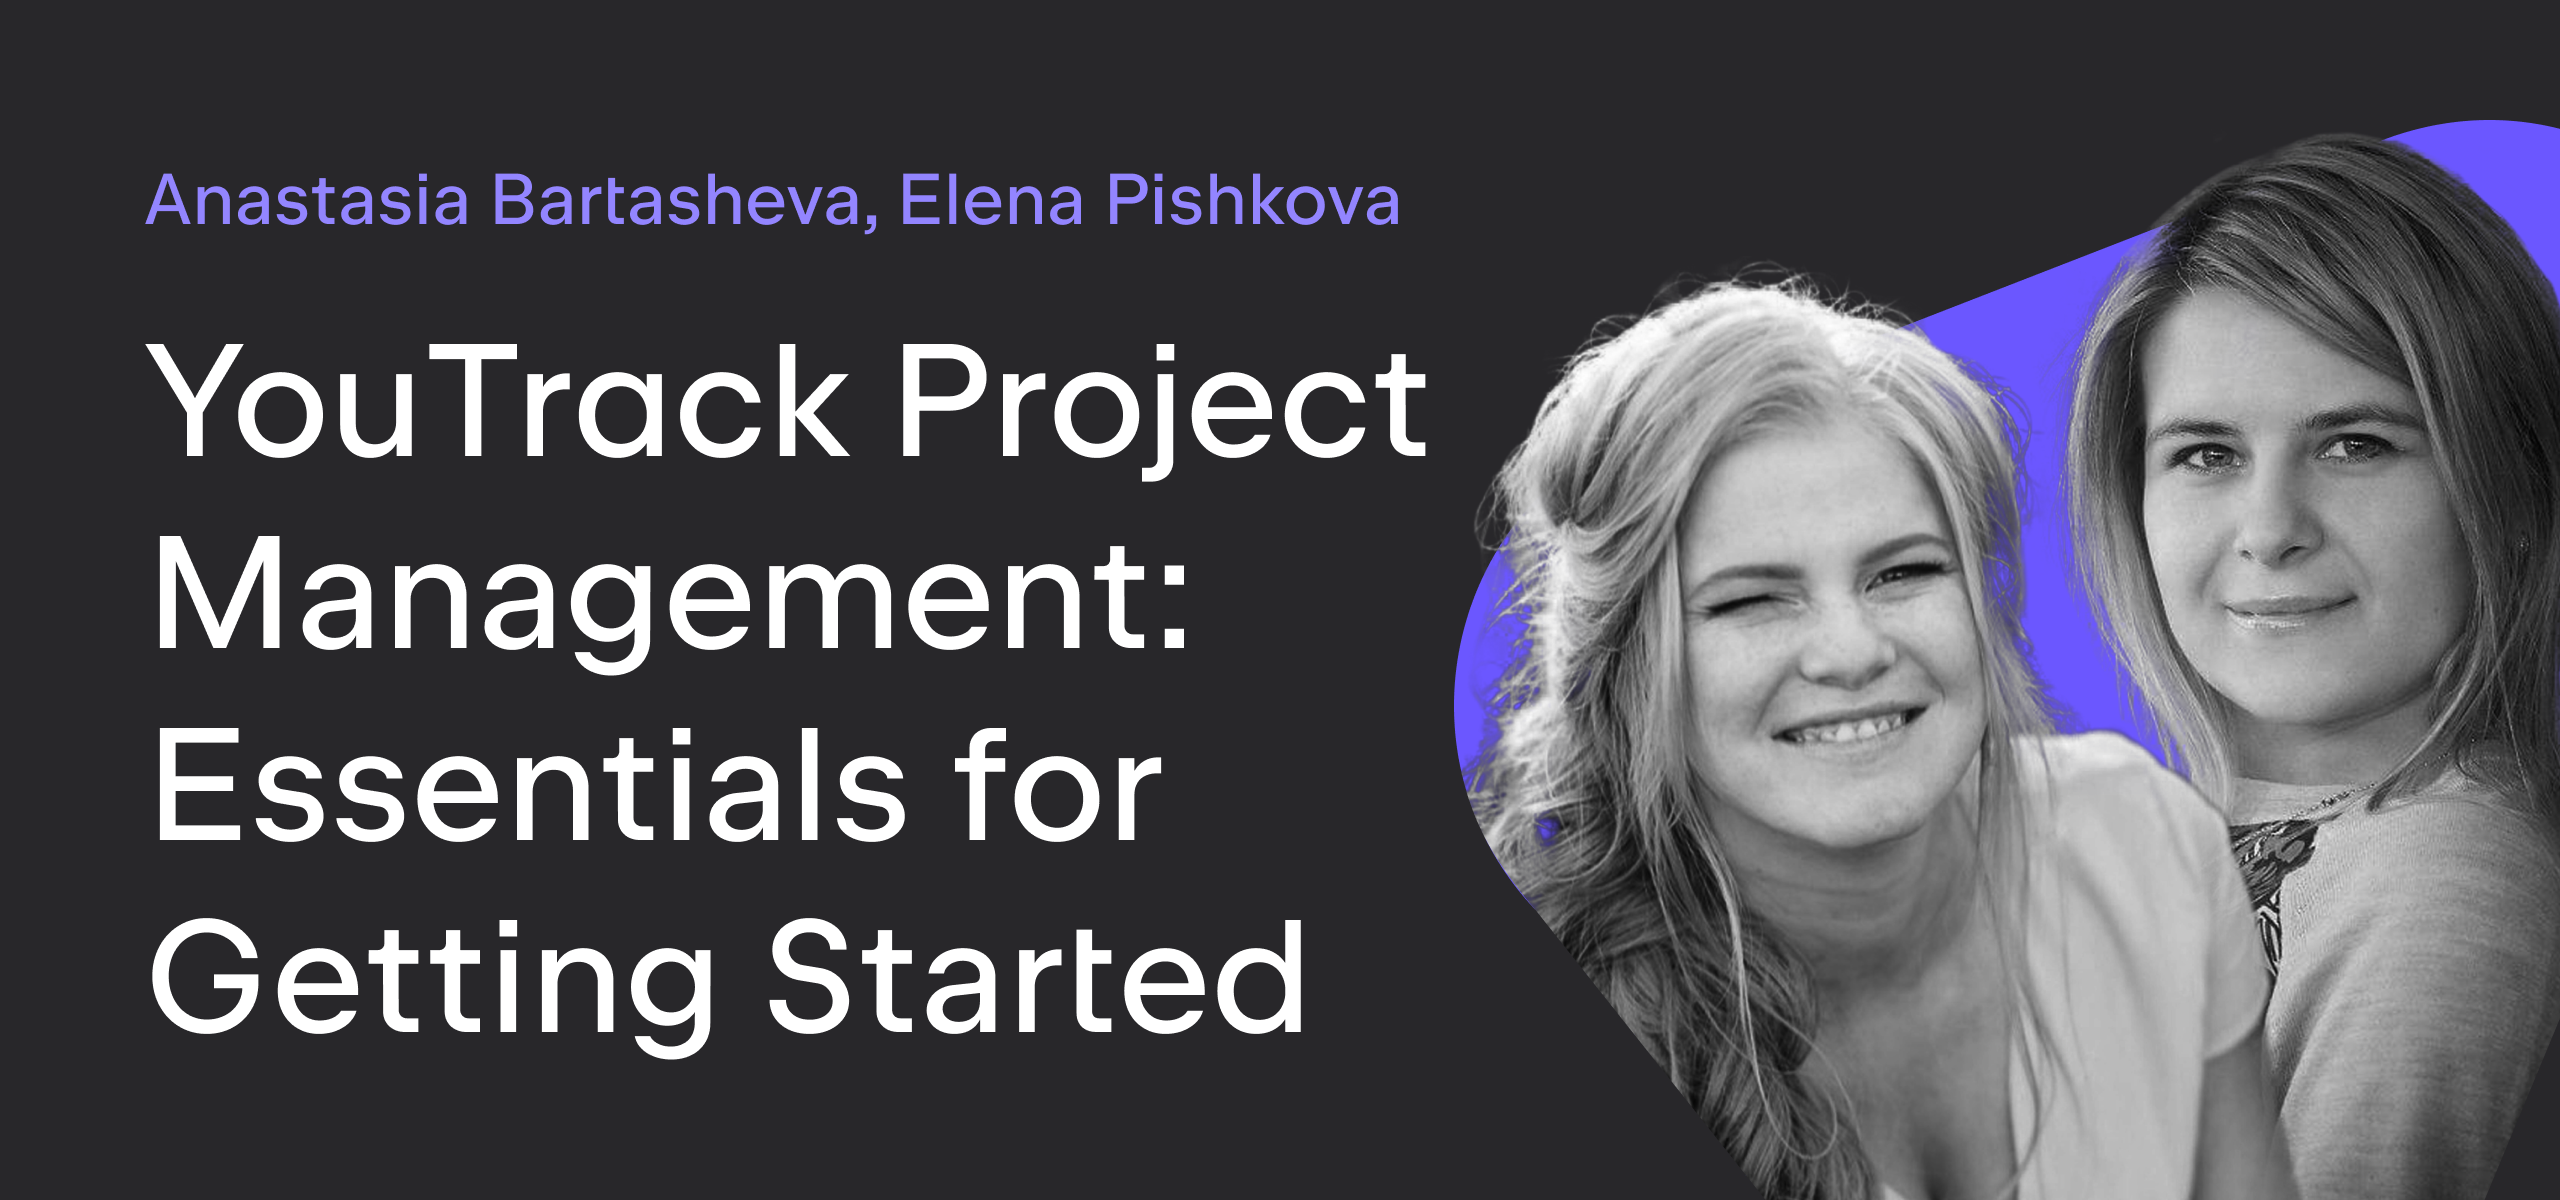 Watch the “YouTrack Project Management: Essentials for Getting
Started” Online Demo